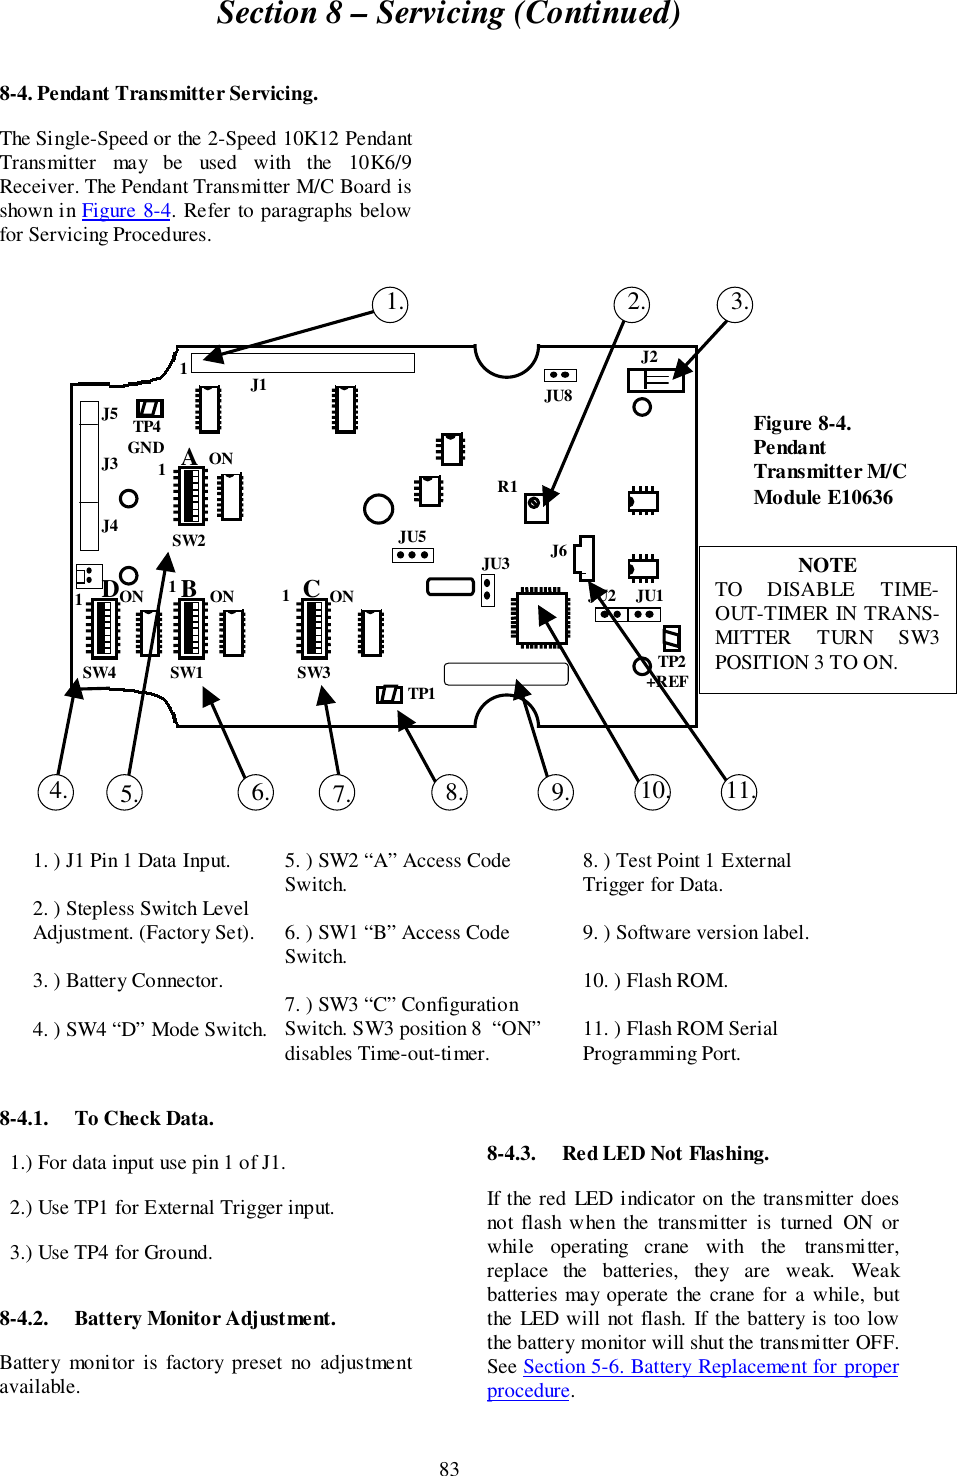 Section 8 – Servicing (Continued)838-4. Pendant Transmitter Servicing.The Single-Speed or the 2-Speed 10K12 PendantTransmitter may be used with the 10K6/9Receiver. The Pendant Transmitter M/C Board isshown in Figure 8-4. Refer to paragraphs belowfor Servicing Procedures.8-4.1. To Check Data.  1.) For data input use pin 1 of J1.  2.) Use TP1 for External Trigger input.  3.) Use TP4 for Ground.8-4.2. Battery Monitor Adjustment.Battery monitor is factory preset no adjustmentavailable.8-4.3. Red LED Not Flashing.If the red LED indicator on the transmitter doesnot flash when the transmitter is turned ON orwhile operating crane with the transmitter,replace the batteries, they are weak. Weakbatteries may operate the crane for a while, butthe LED will not flash. If the battery is too lowthe battery monitor will shut the transmitter OFF.See Section 5-6. Battery Replacement for properprocedure.1ABONON1SW1SW2SW3SW4CDTP4GNDTP1TP2+REFJU8JU5JU3JU2 JU1J6J1J2J3J4J5R115. 7.4.2. 3.8.1.9. 10.6. 11.1. ) J1 Pin 1 Data Input.2. ) Stepless Switch LevelAdjustment. (Factory Set).3. ) Battery Connector.4. ) SW4 “D” Mode Switch.5. ) SW2 “A” Access CodeSwitch.6. ) SW1 “B” Access CodeSwitch.7. ) SW3 “C” ConfigurationSwitch. SW3 position 8  “ON”disables Time-out-timer.8. ) Test Point 1 ExternalTrigger for Data.9. ) Software version label.10. ) Flash ROM.11. ) Flash ROM SerialProgramming Port.Figure 8-4.PendantTransmitter M/CModule E1063611ON ONNOTETO DISABLE TIME-OUT-TIMER IN TRANS-MITTER TURN SW3POSITION 3 TO ON.